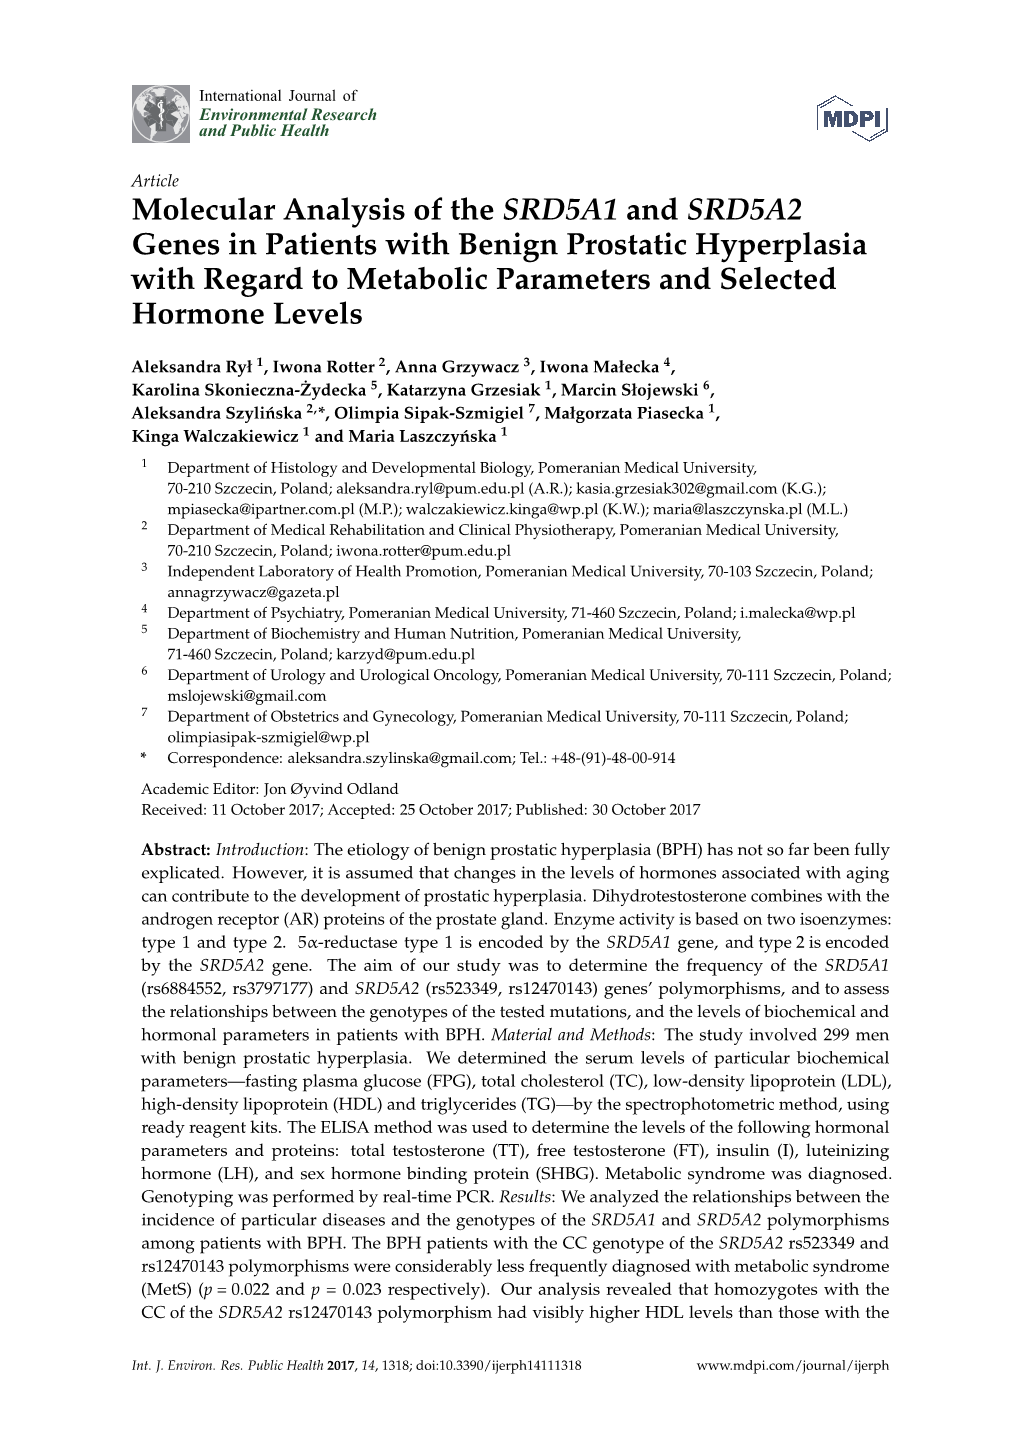 Molecular Analysis of the SRD5A1 and SRD5A2 Genes in Patients with Benign Prostatic Hyperplasia with Regard to Metabolic Parameters and Selected Hormone Levels